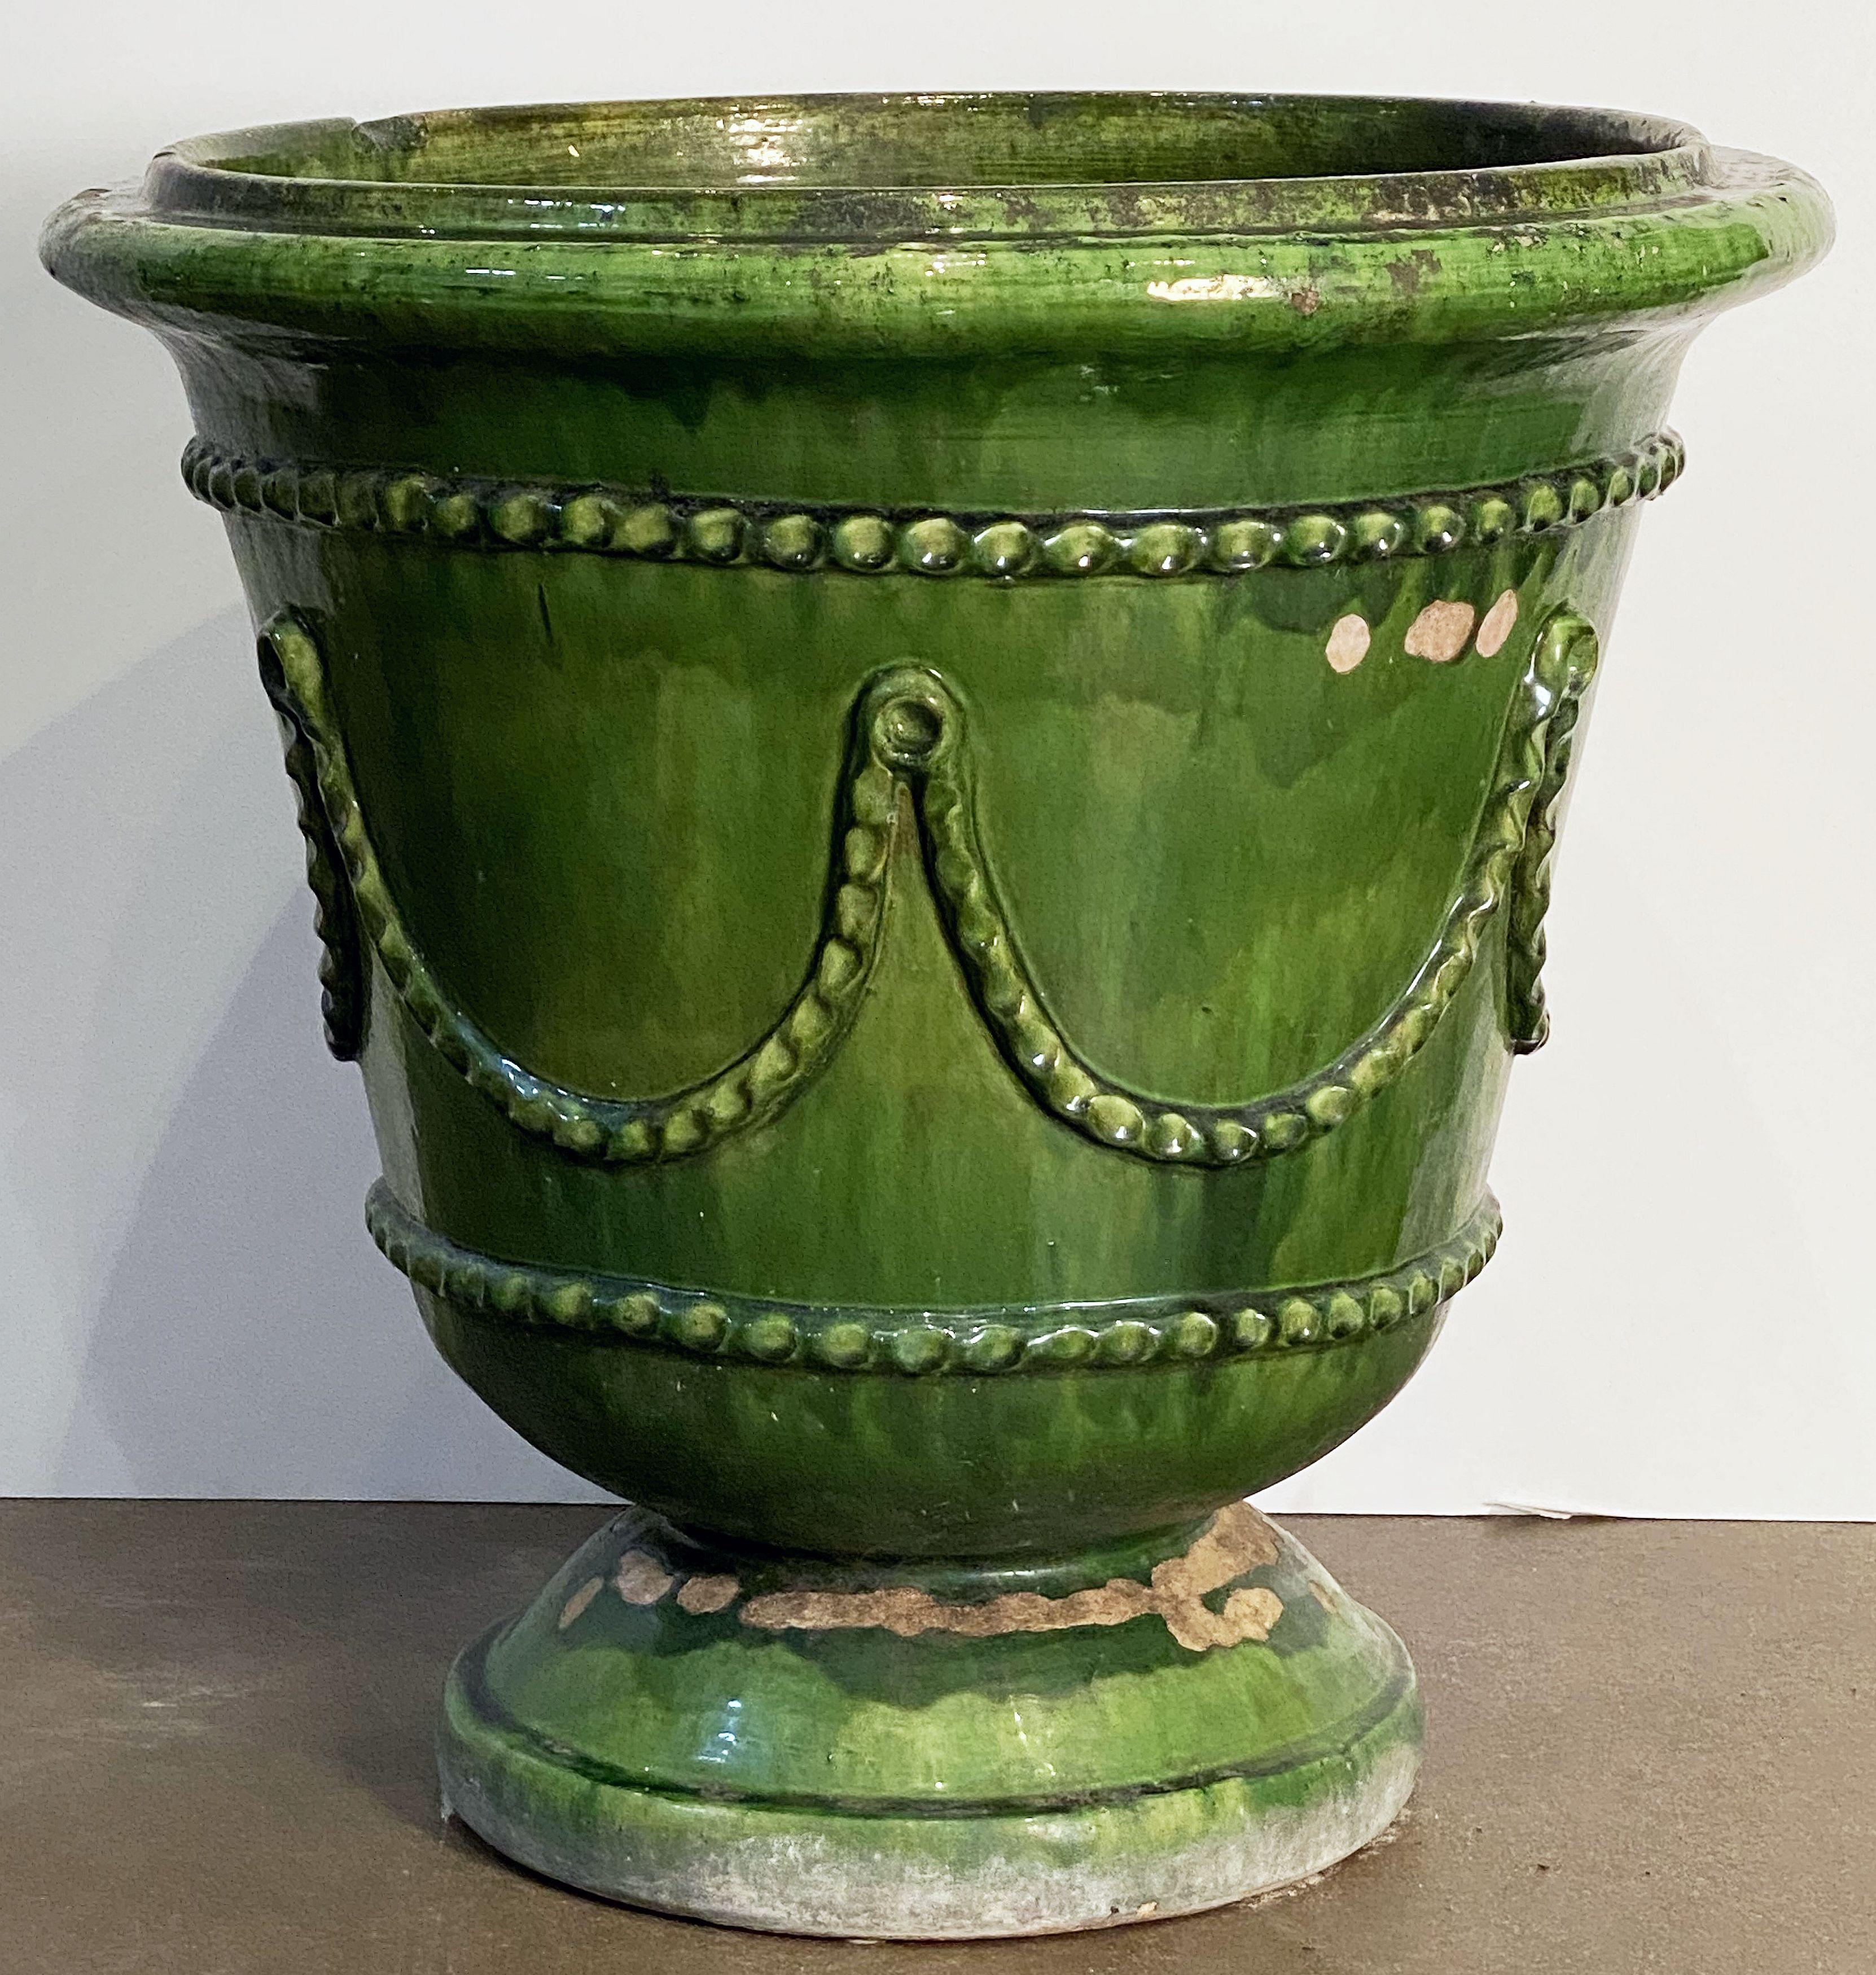 Large Glazed Earthenware Castelnaudary-Style Urn or Planter Pot from France In Good Condition For Sale In Austin, TX